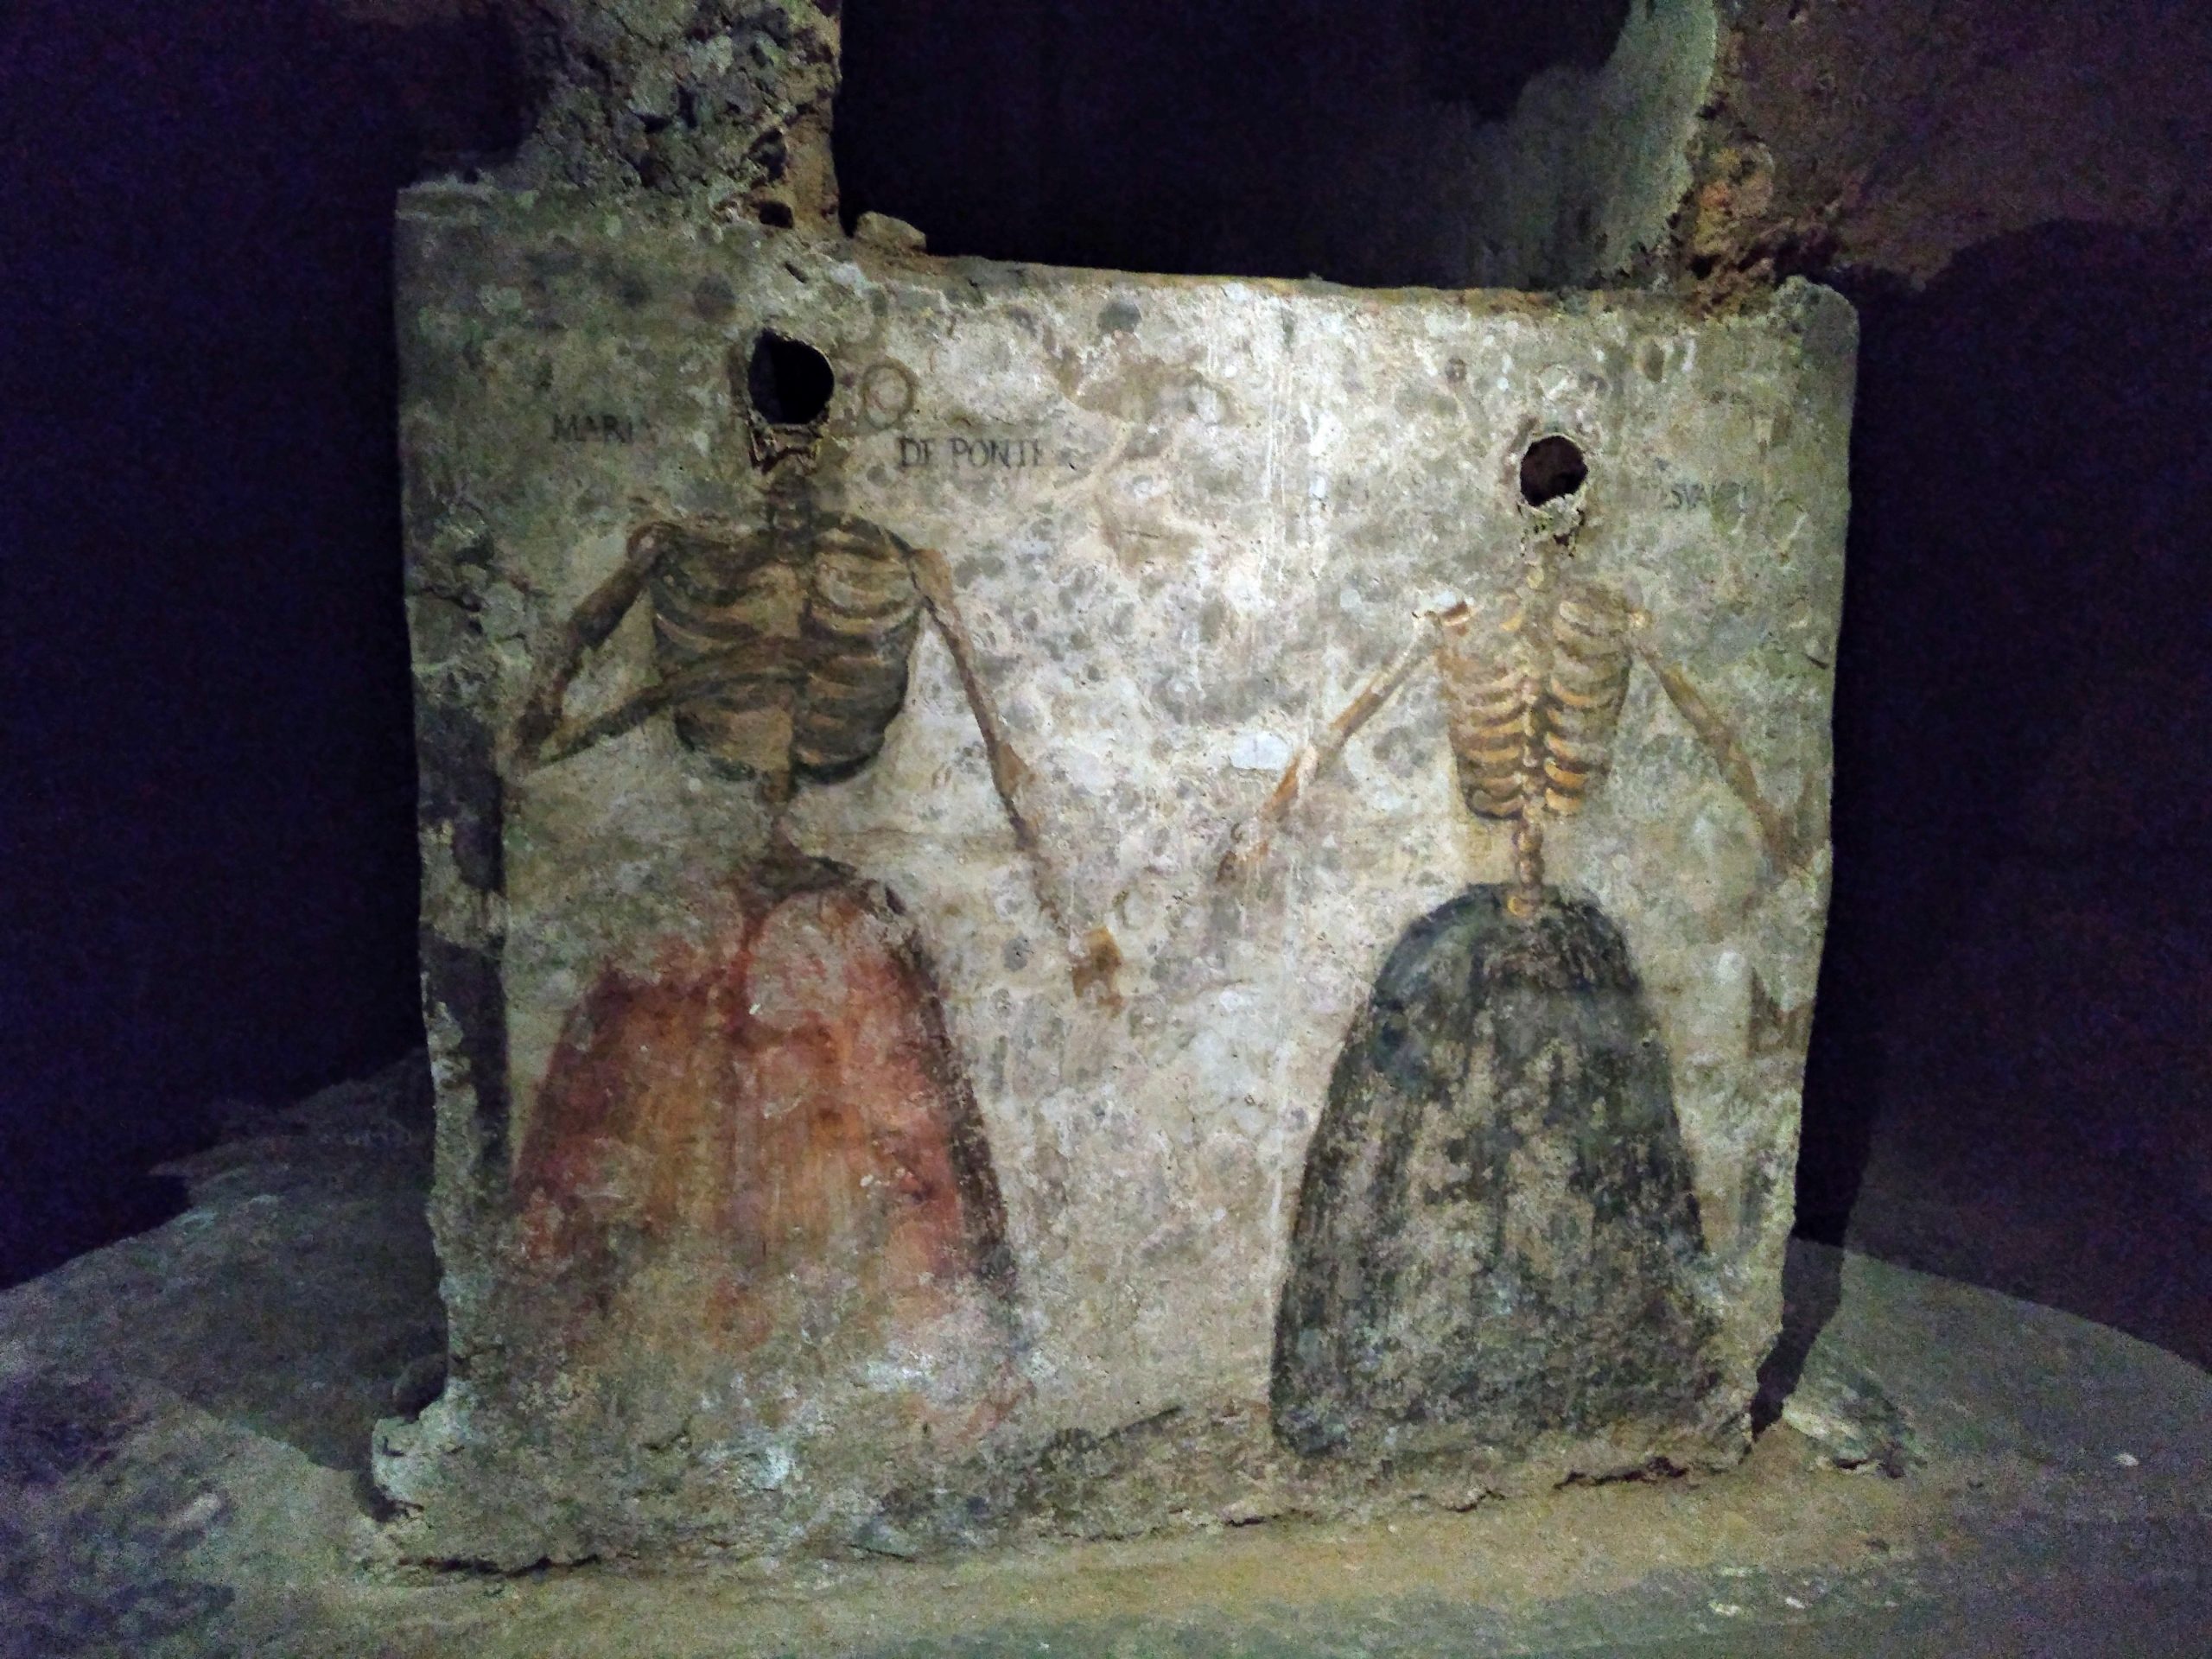 QEST study visit, frescoes of skeletons with skirts on